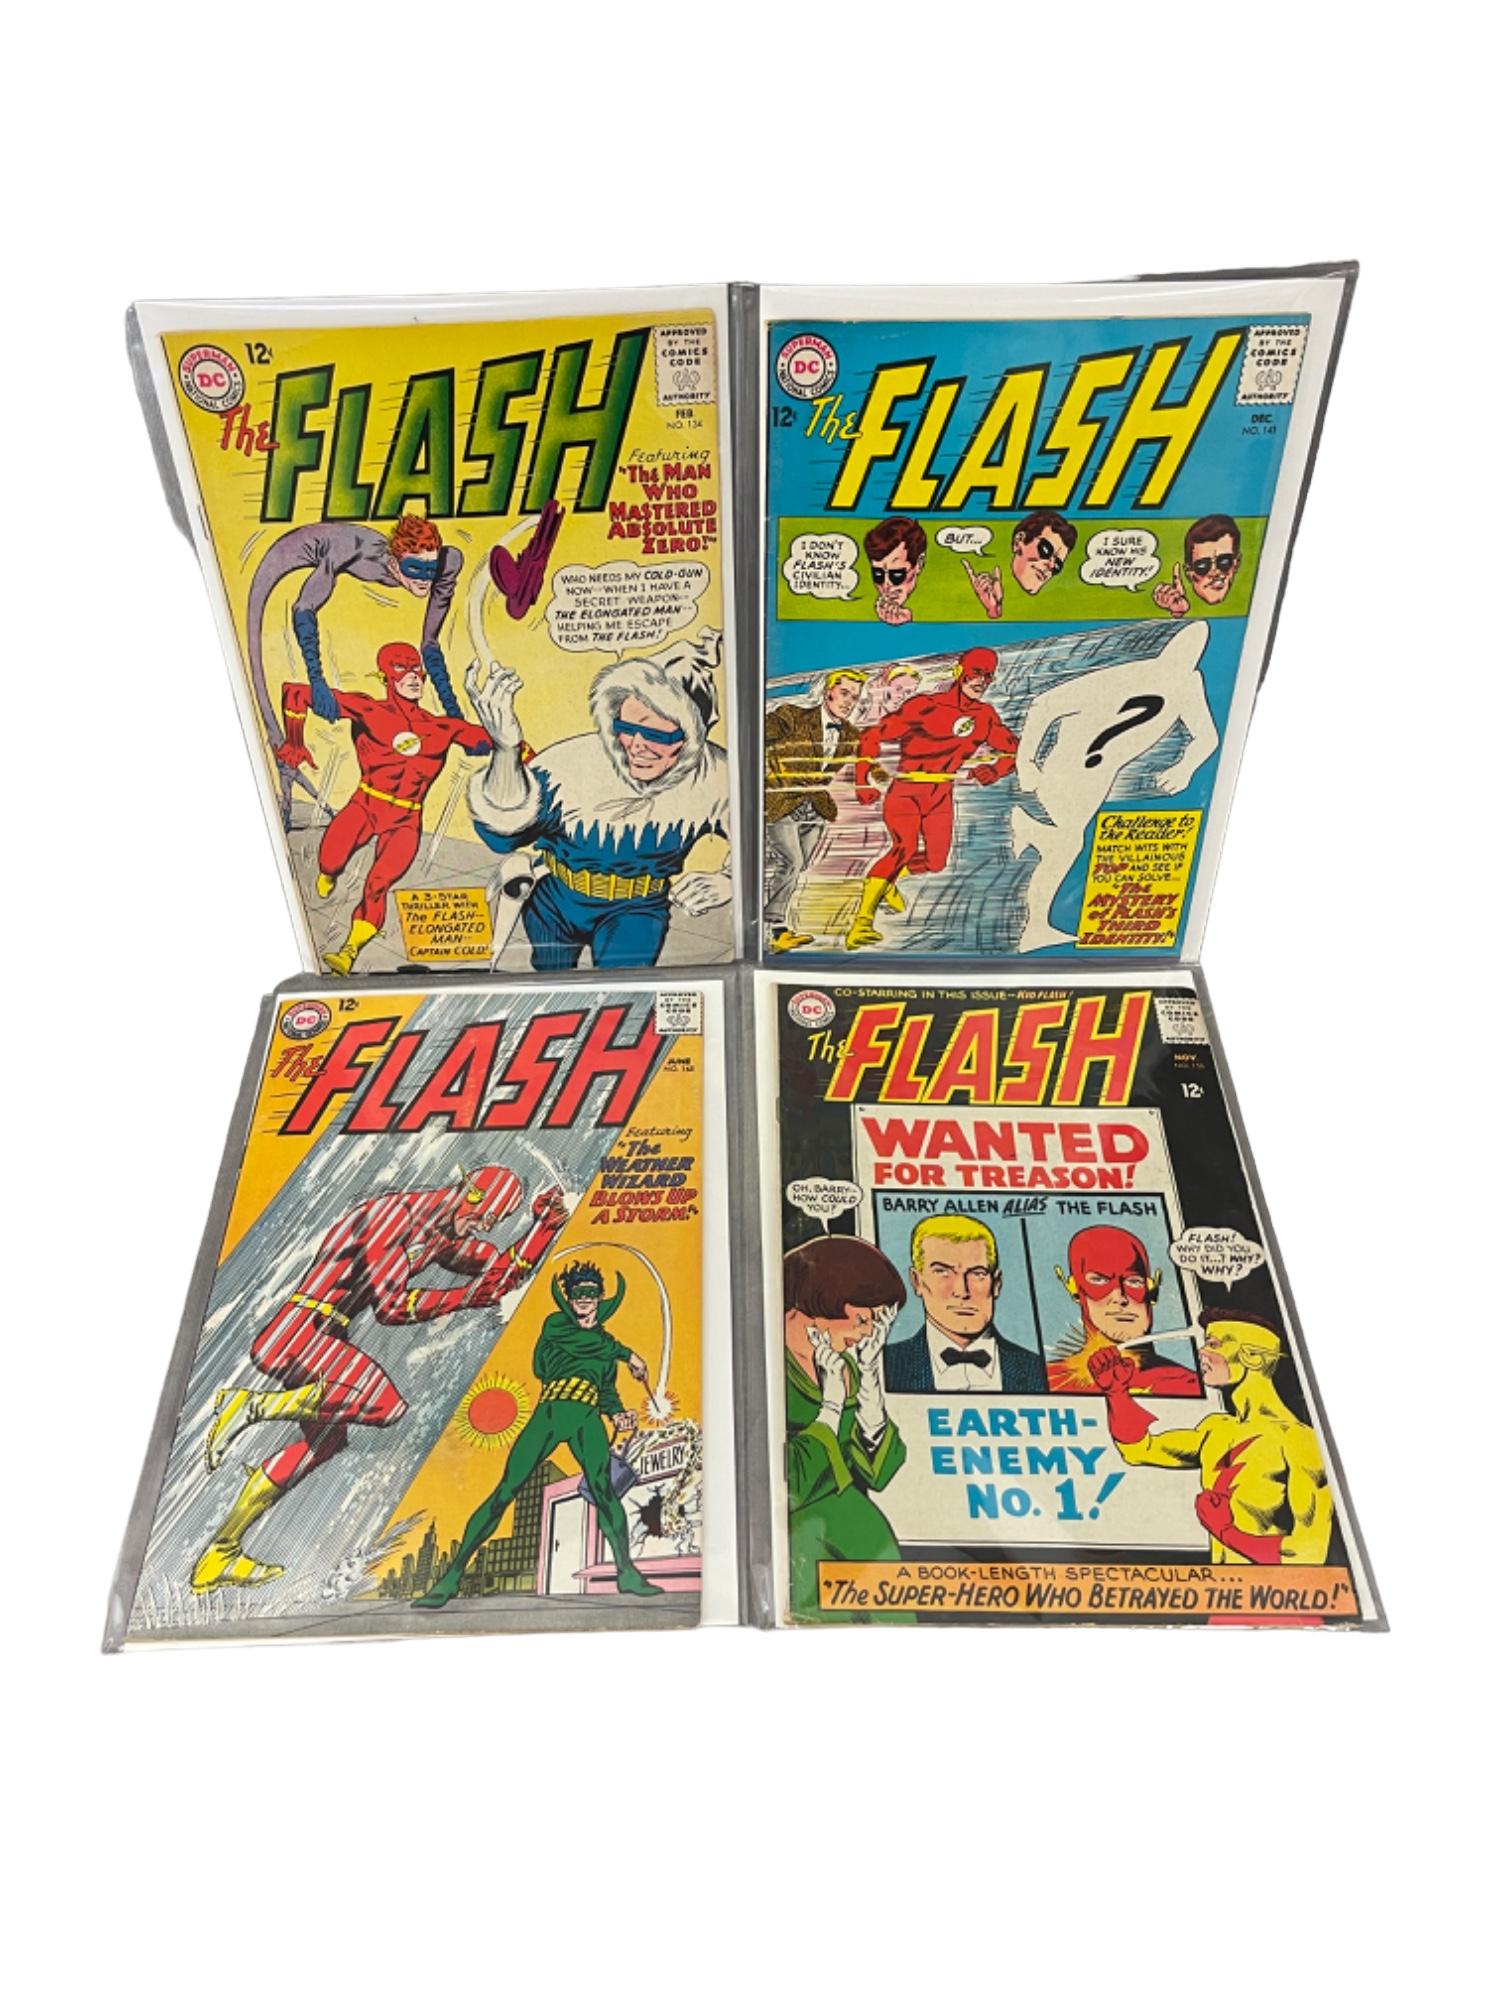 The Flash #134, #141, #145, #156 Marvel DC Comic Book Collection Lot of 4